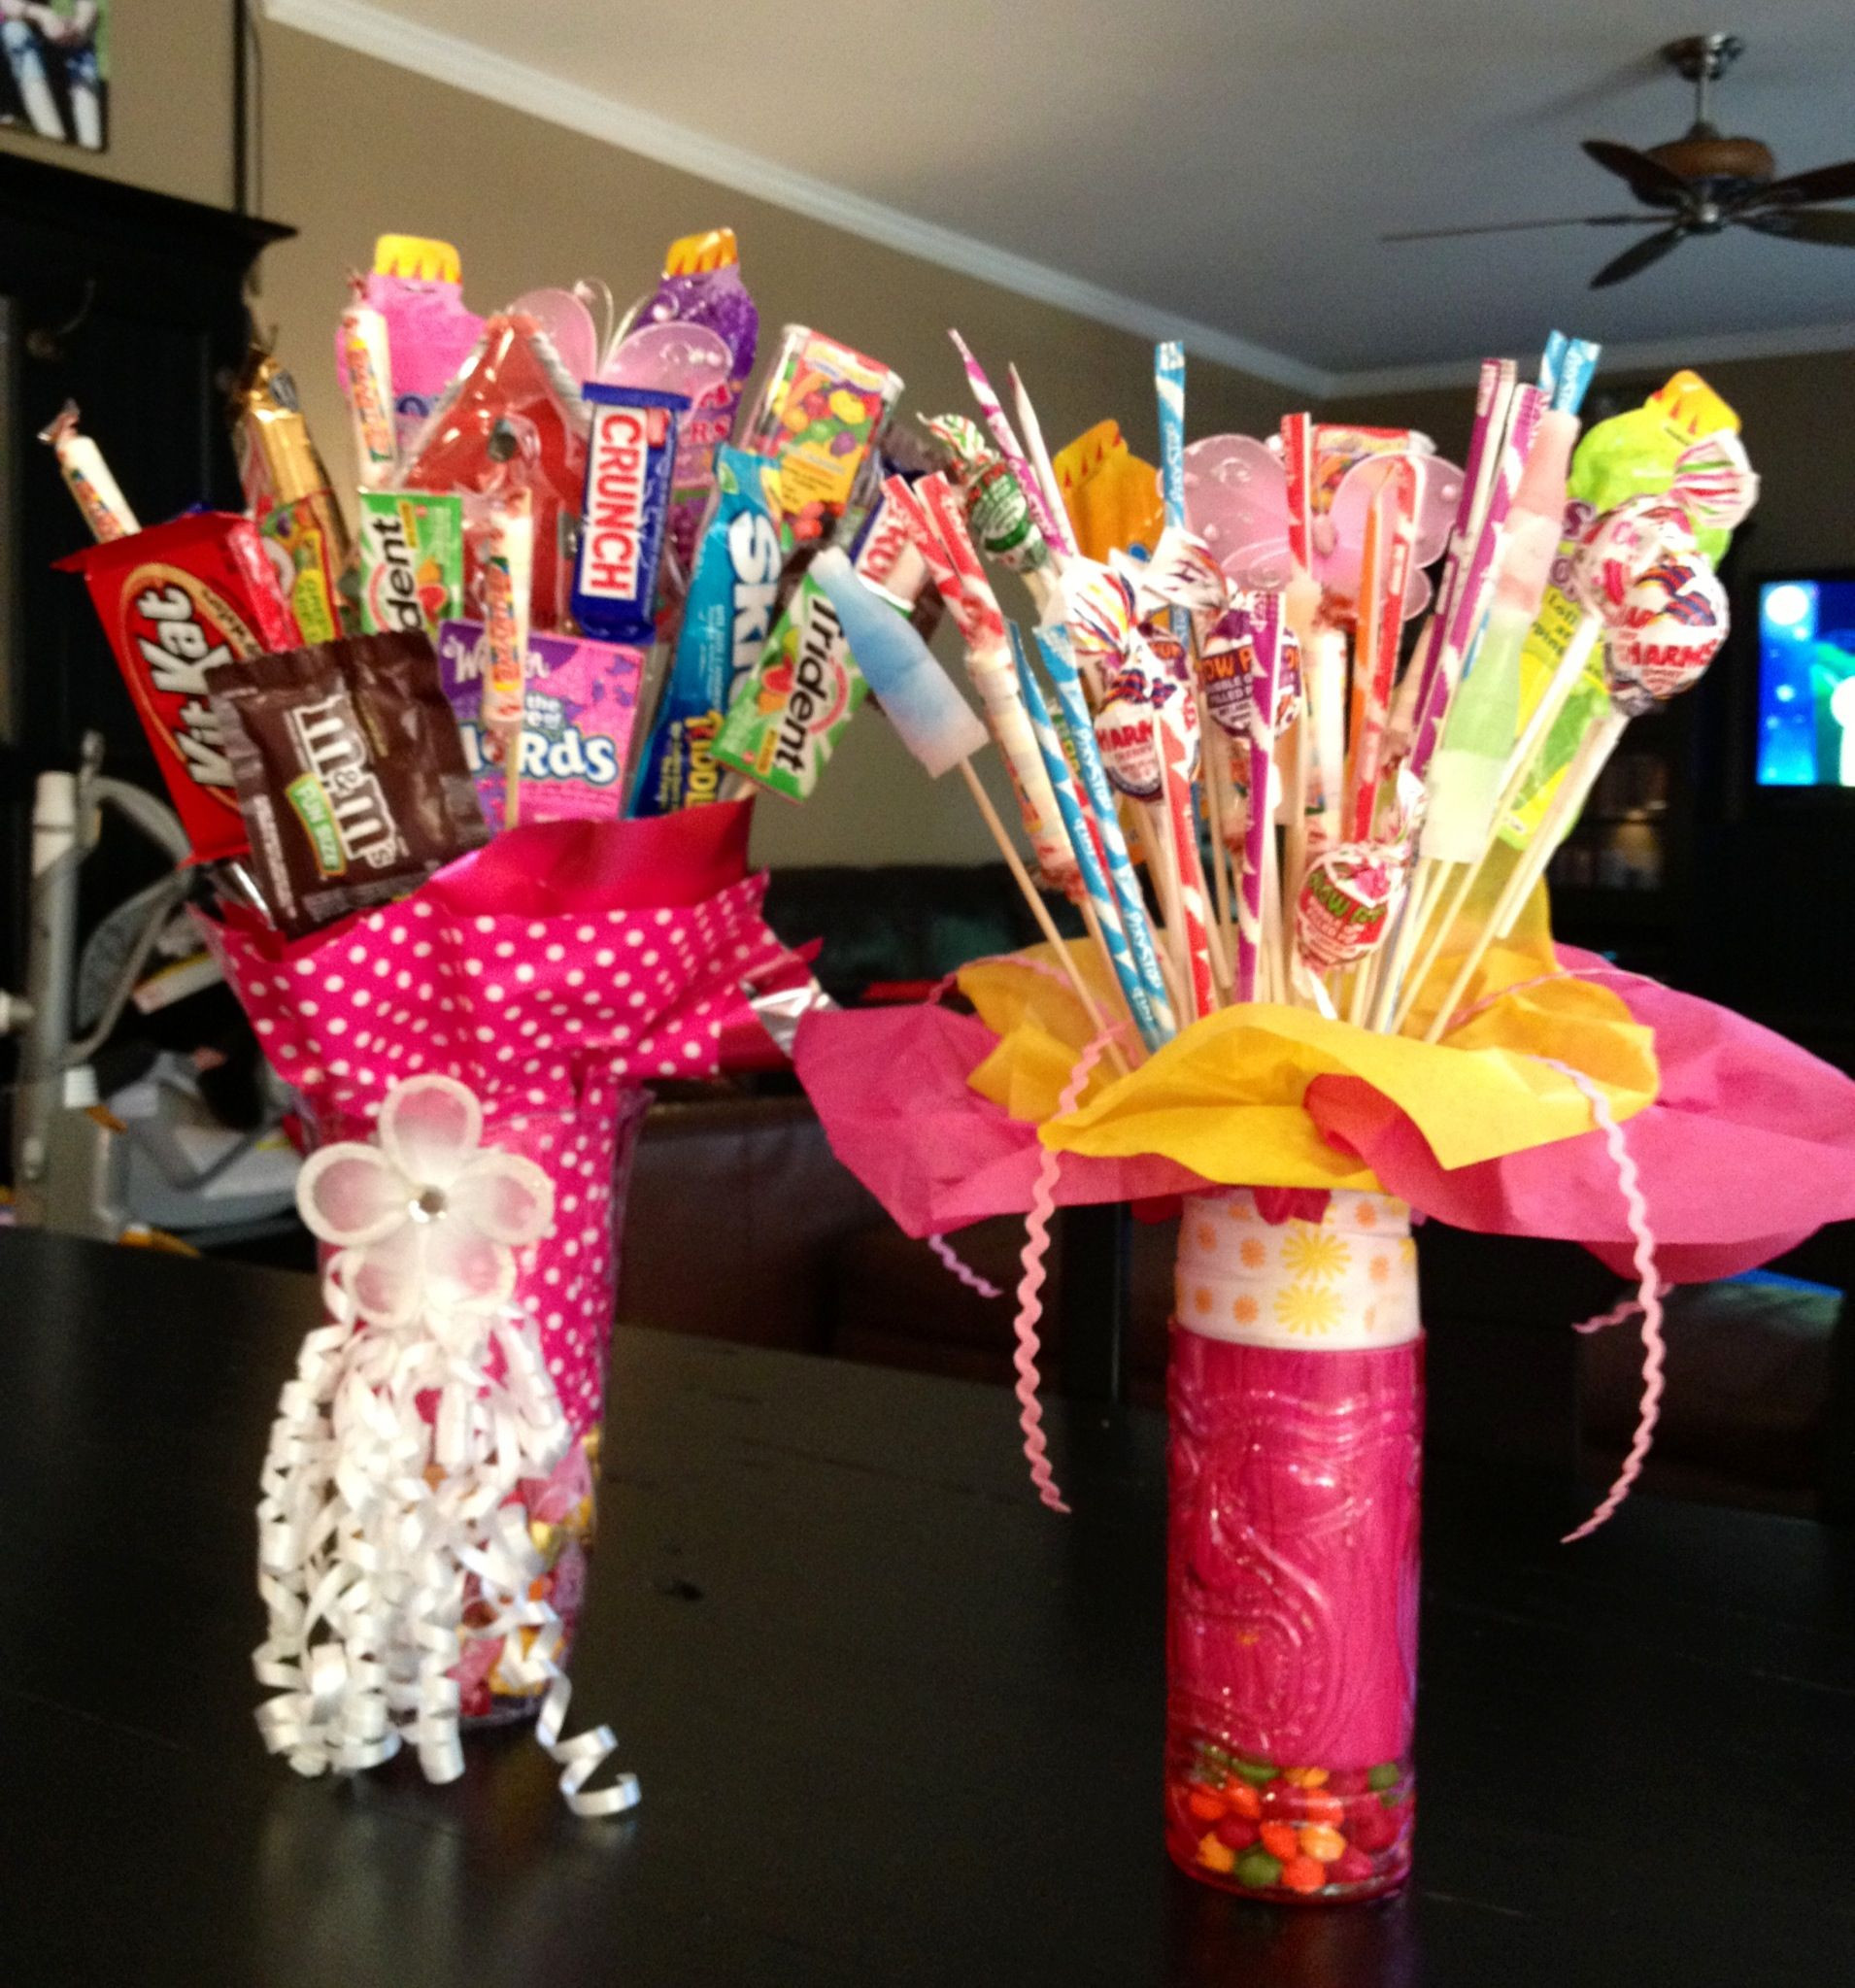 8Th Grade Graduation Gift Ideas For Him
 Candy bouquets for 5th grade graduation Idea for Riley